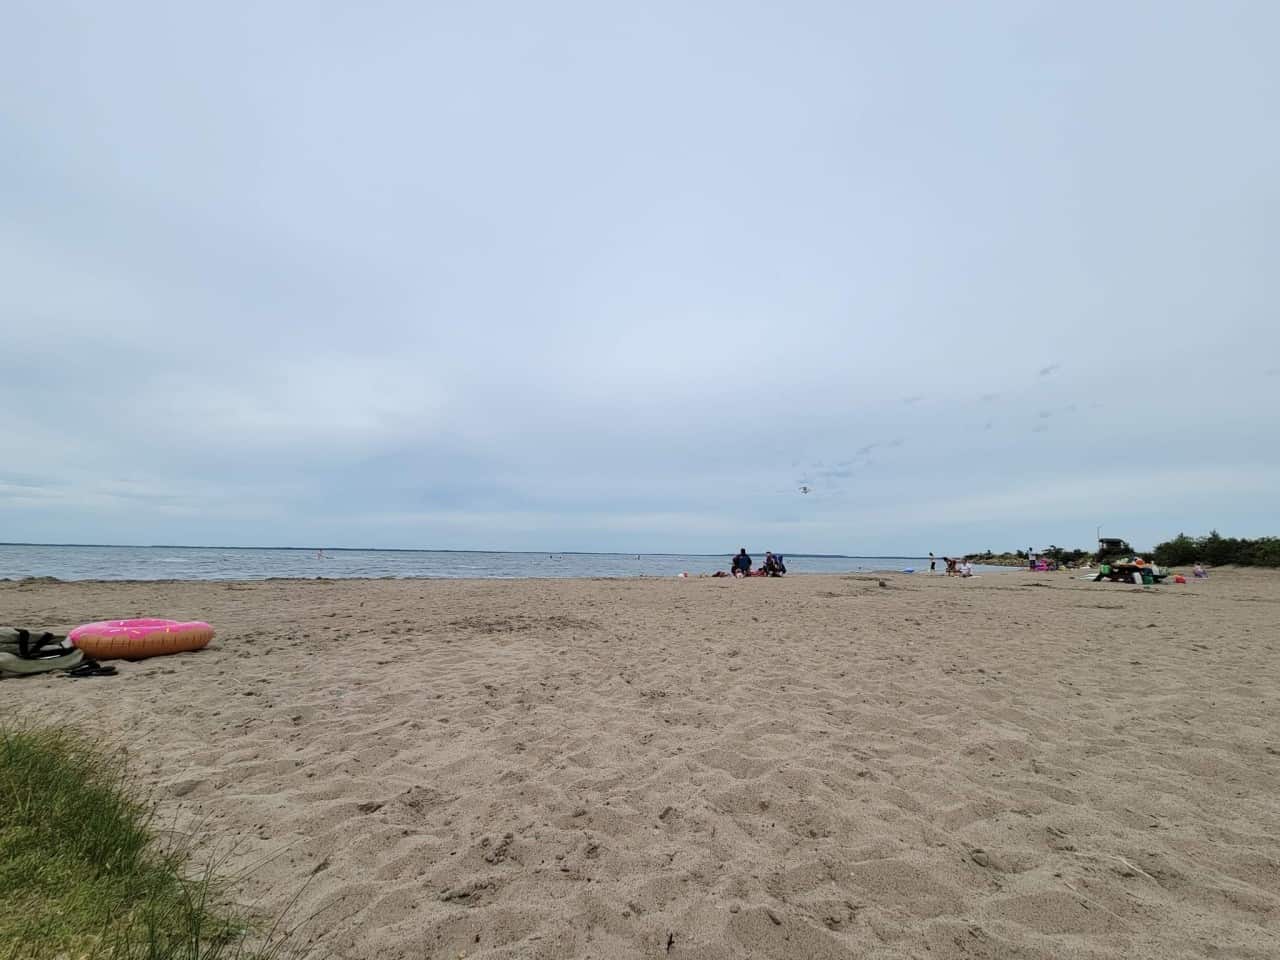 Buffalo Lake Alberta Beach is a popular destination for swimming, kayaking and canoeing.